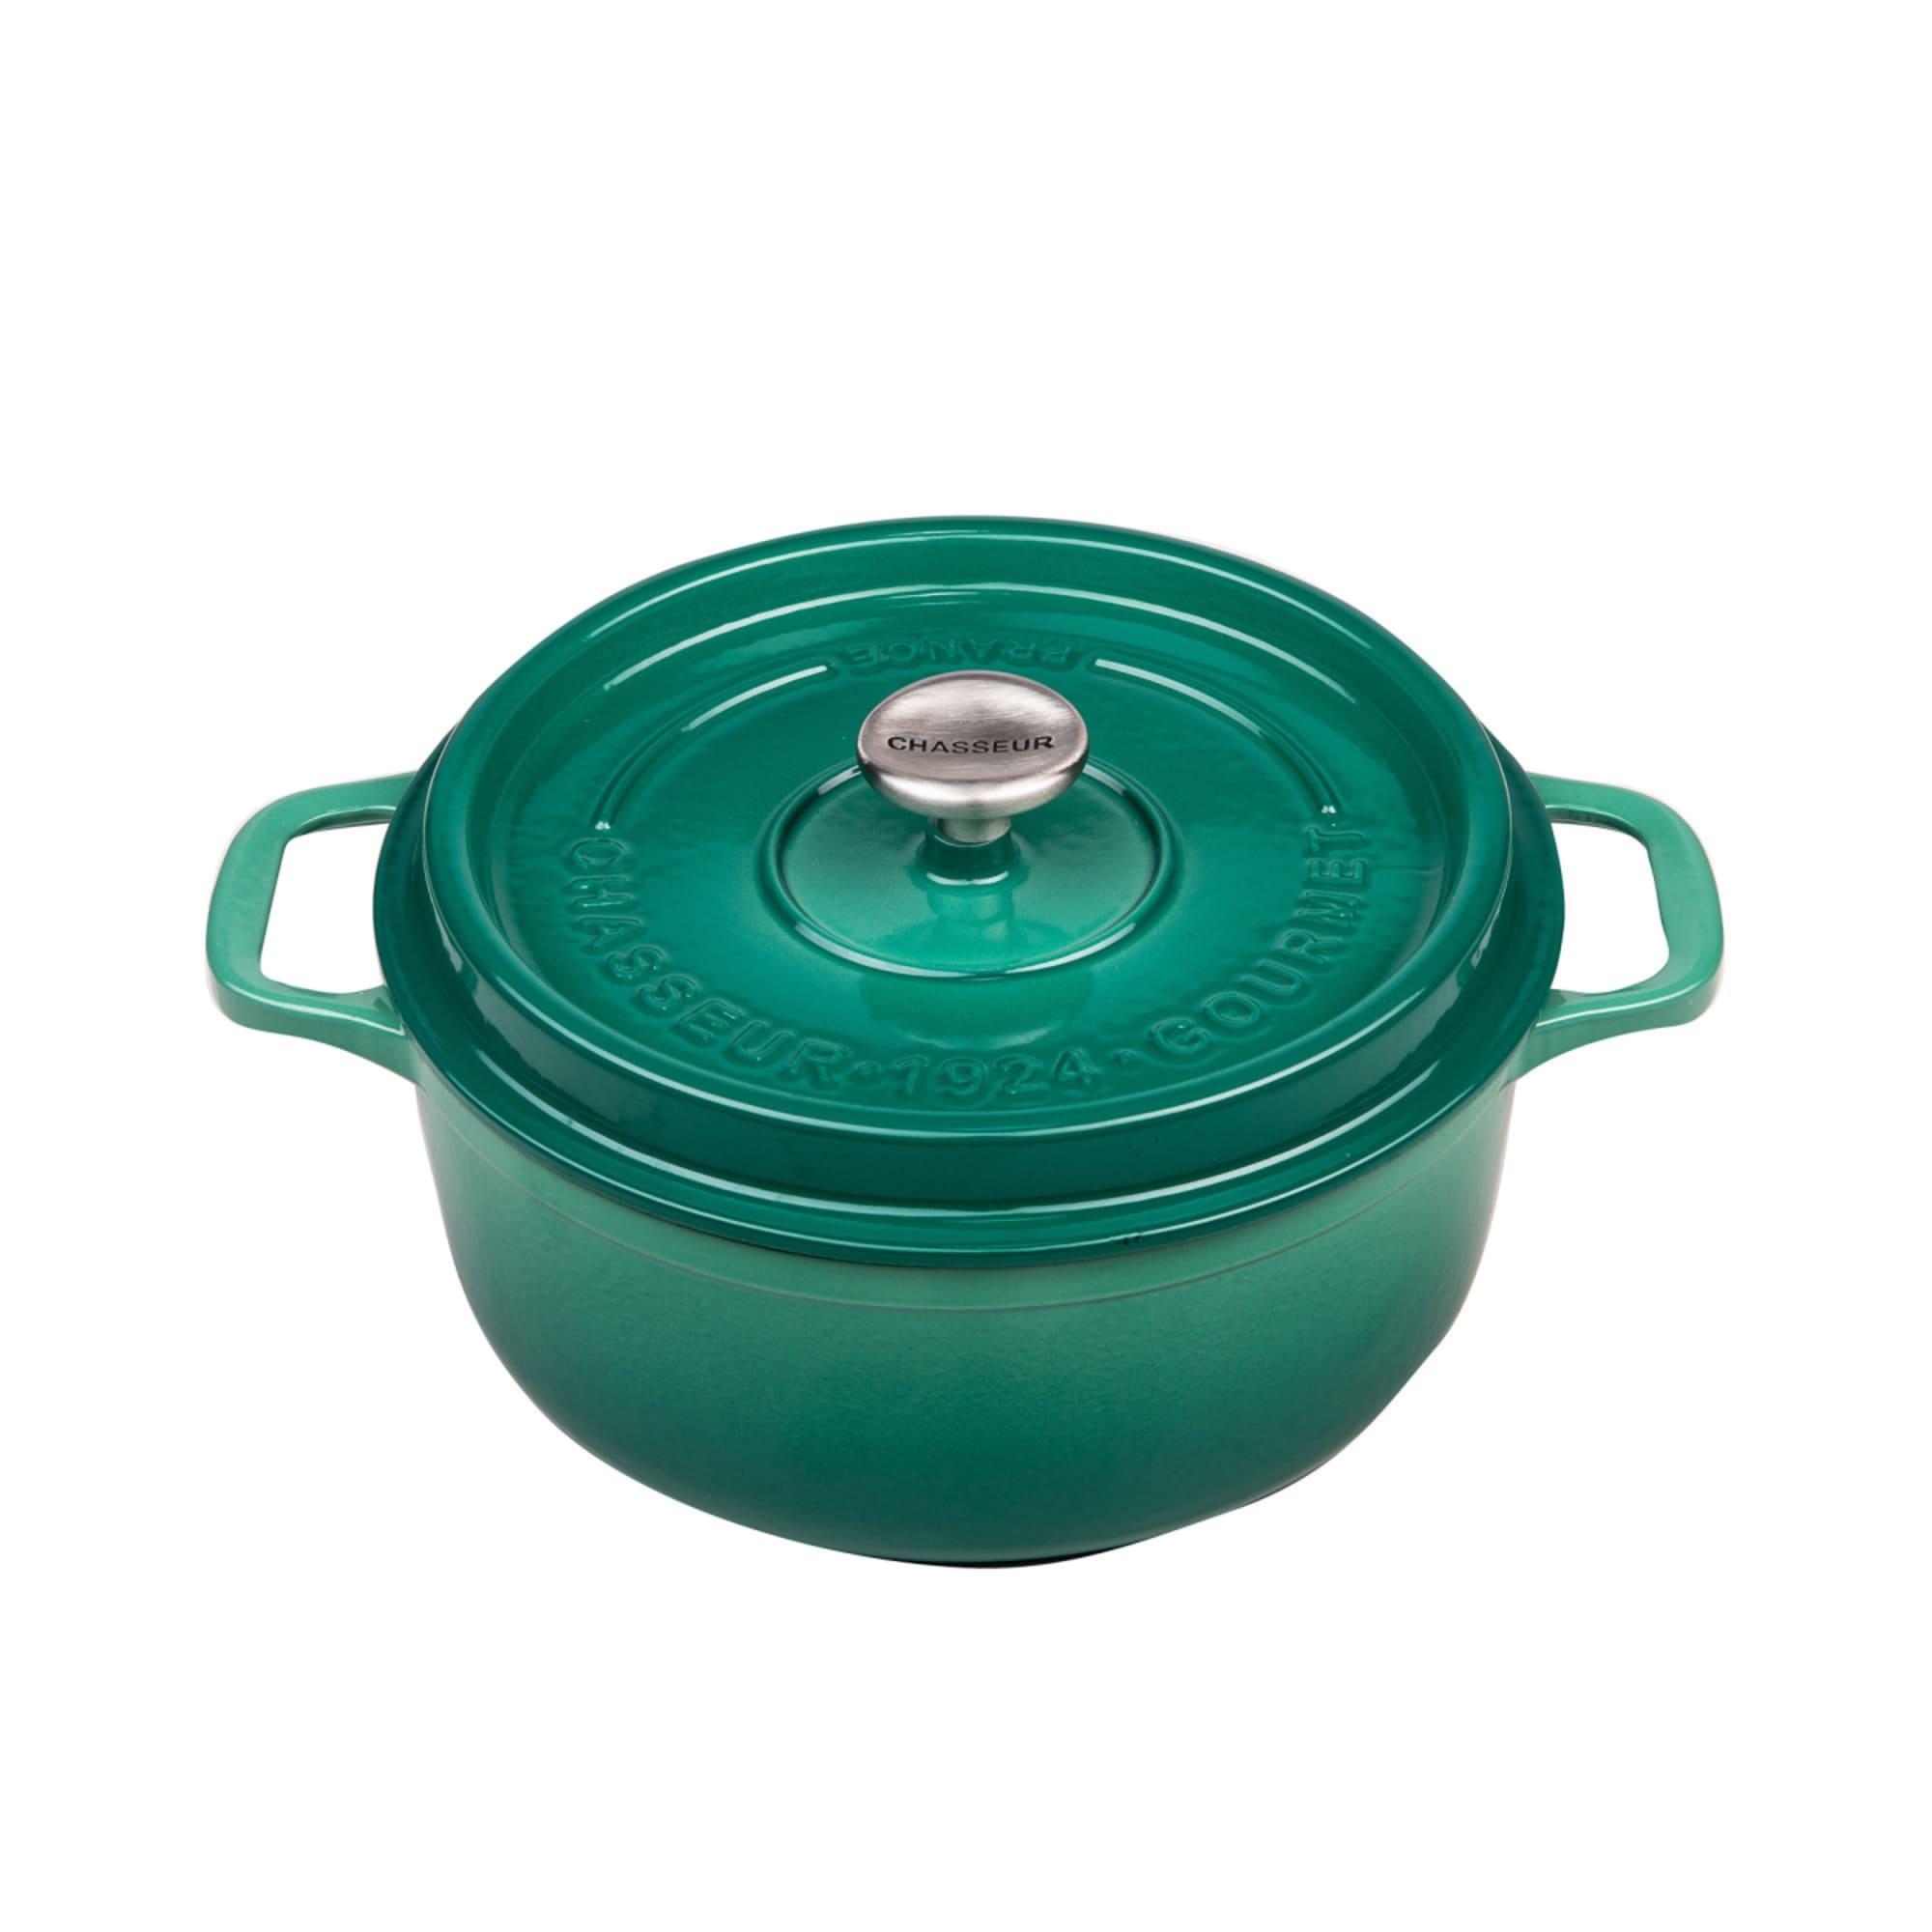 Chasseur Gourmet Round French Oven 28cm - 6.1L Jade Image 1